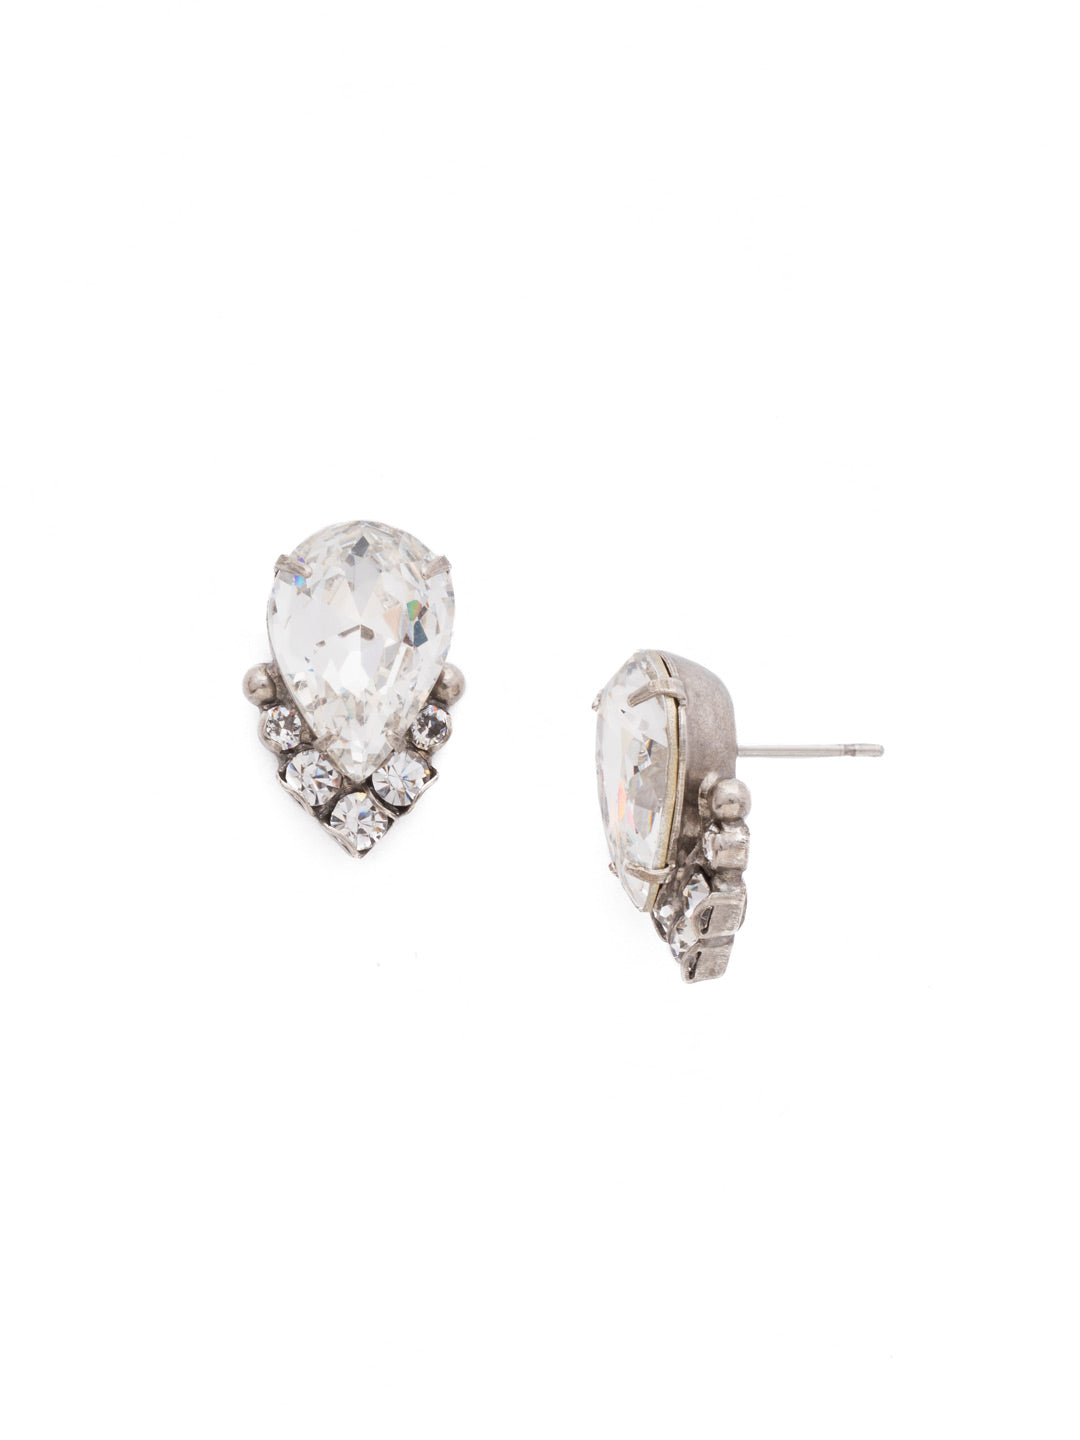 Crystal Teardrop and Cluster Stud Earrings - EDA18ASCRY - <p>These petite posts feature a central crystal teardrop accented by a cluster of smaller, round stones for the perfect pop of sparkle! From Sorrelli's Crystal collection in our Antique Silver-tone finish.</p>